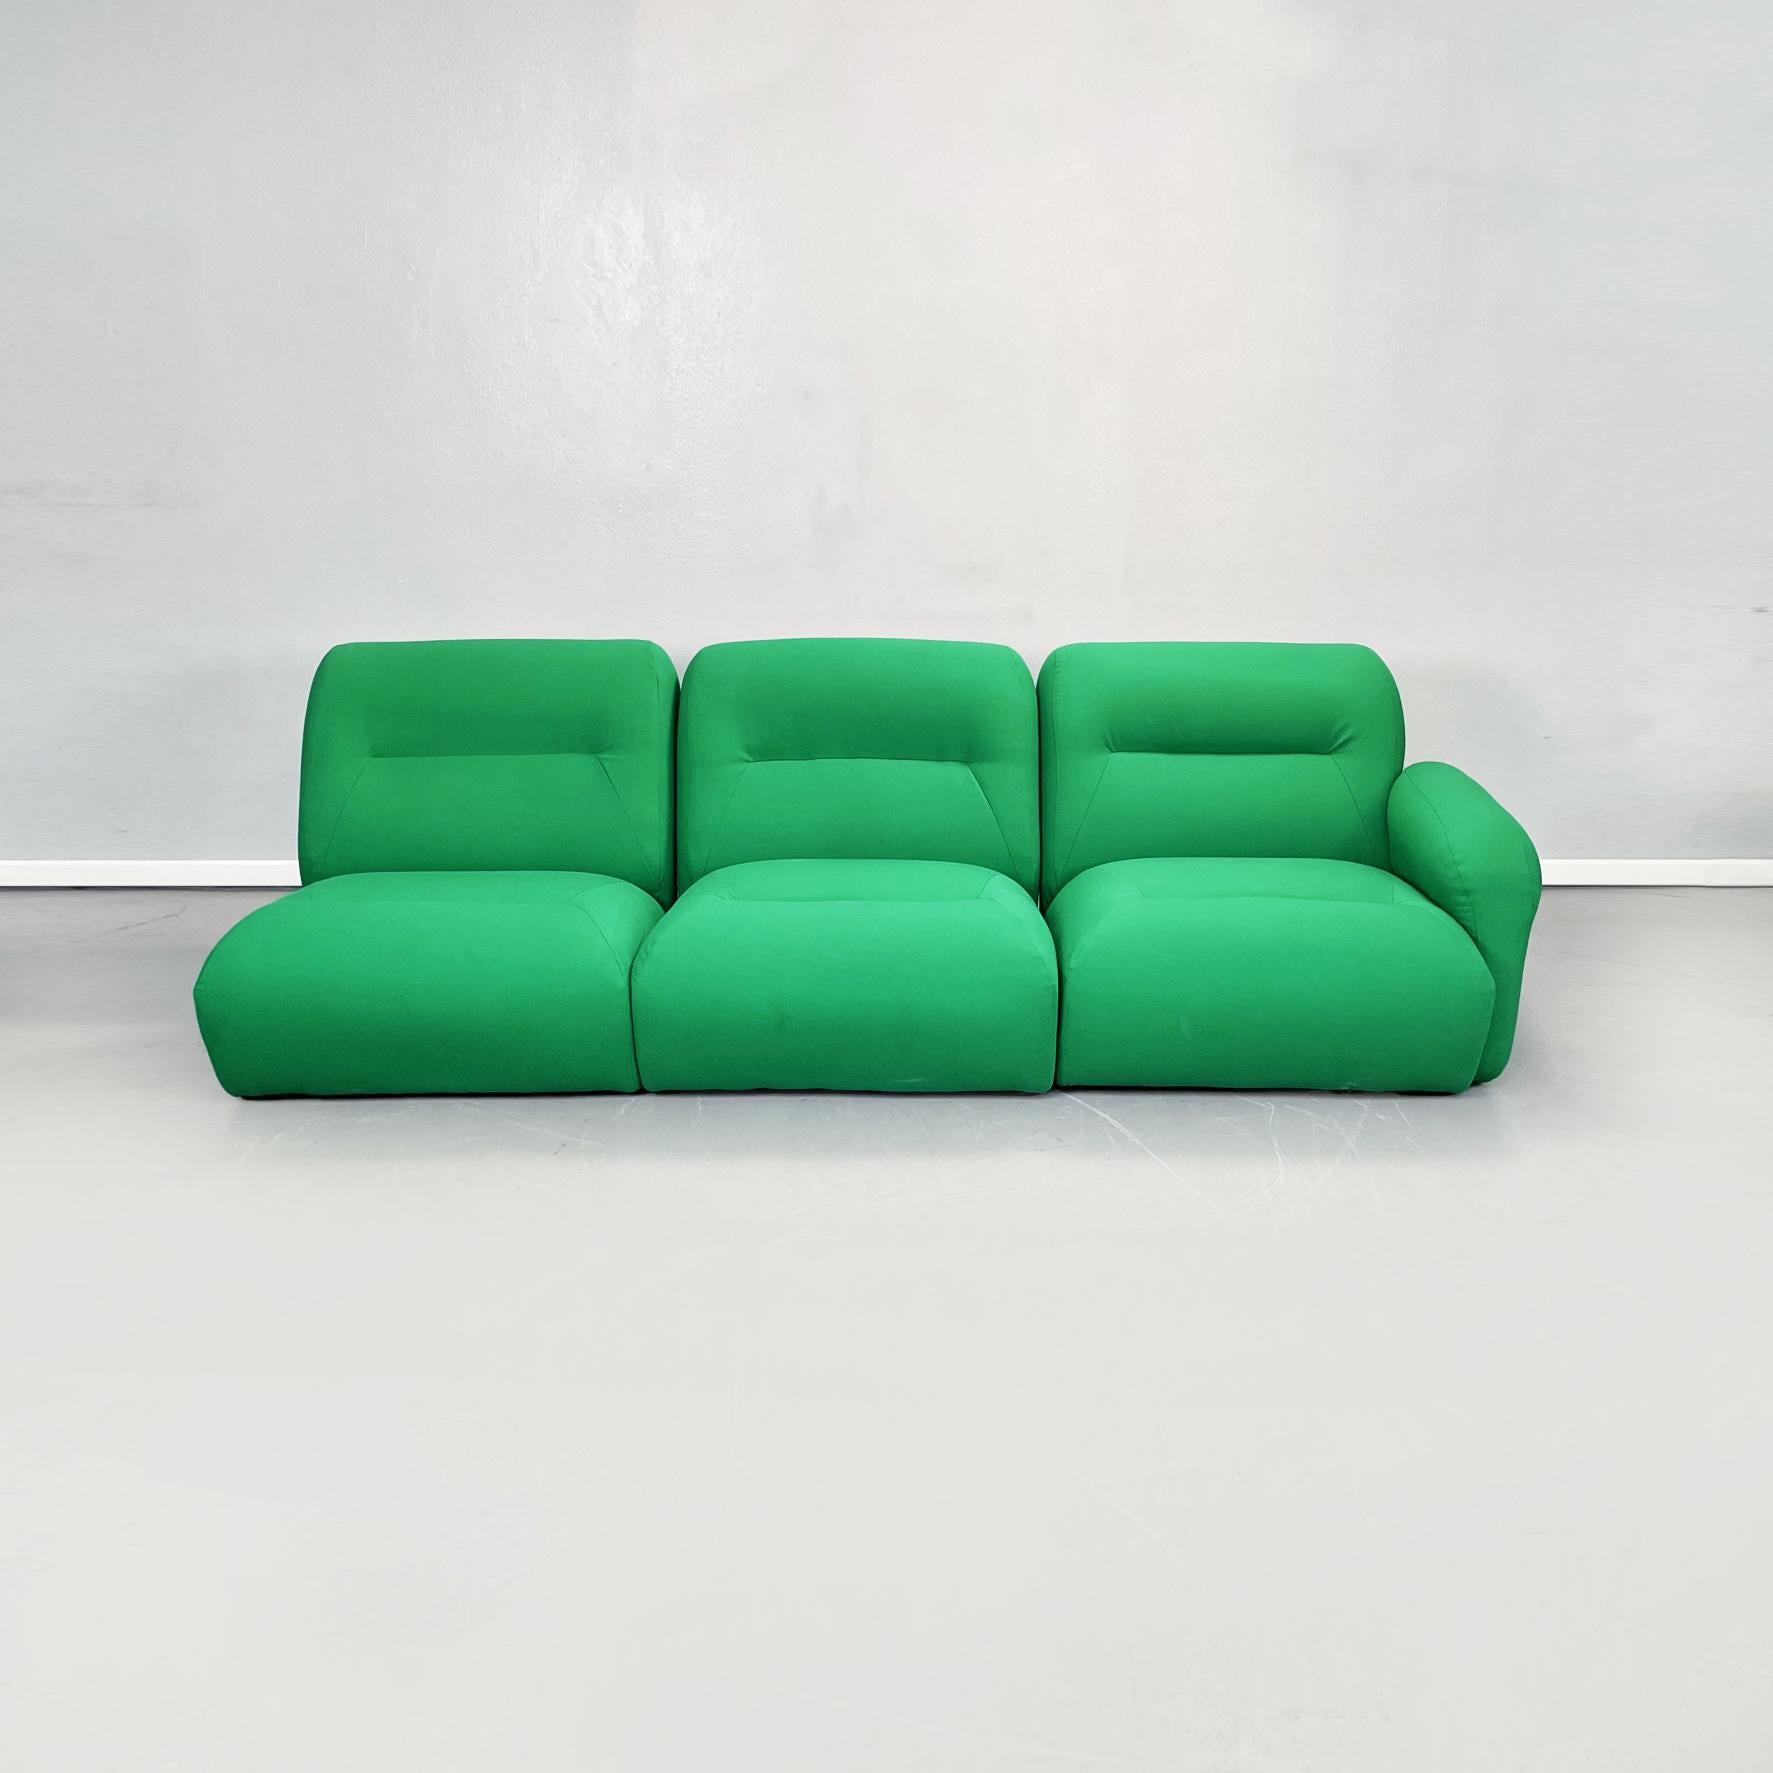 Italian space age Modular sofa in green fabric with metal insert, 1970s
Fantastic modular sofa in bright green fabric, consisting of 4 simple modules and 2 with armrest. There are two horizontal seams on the seat and back. There are round metal